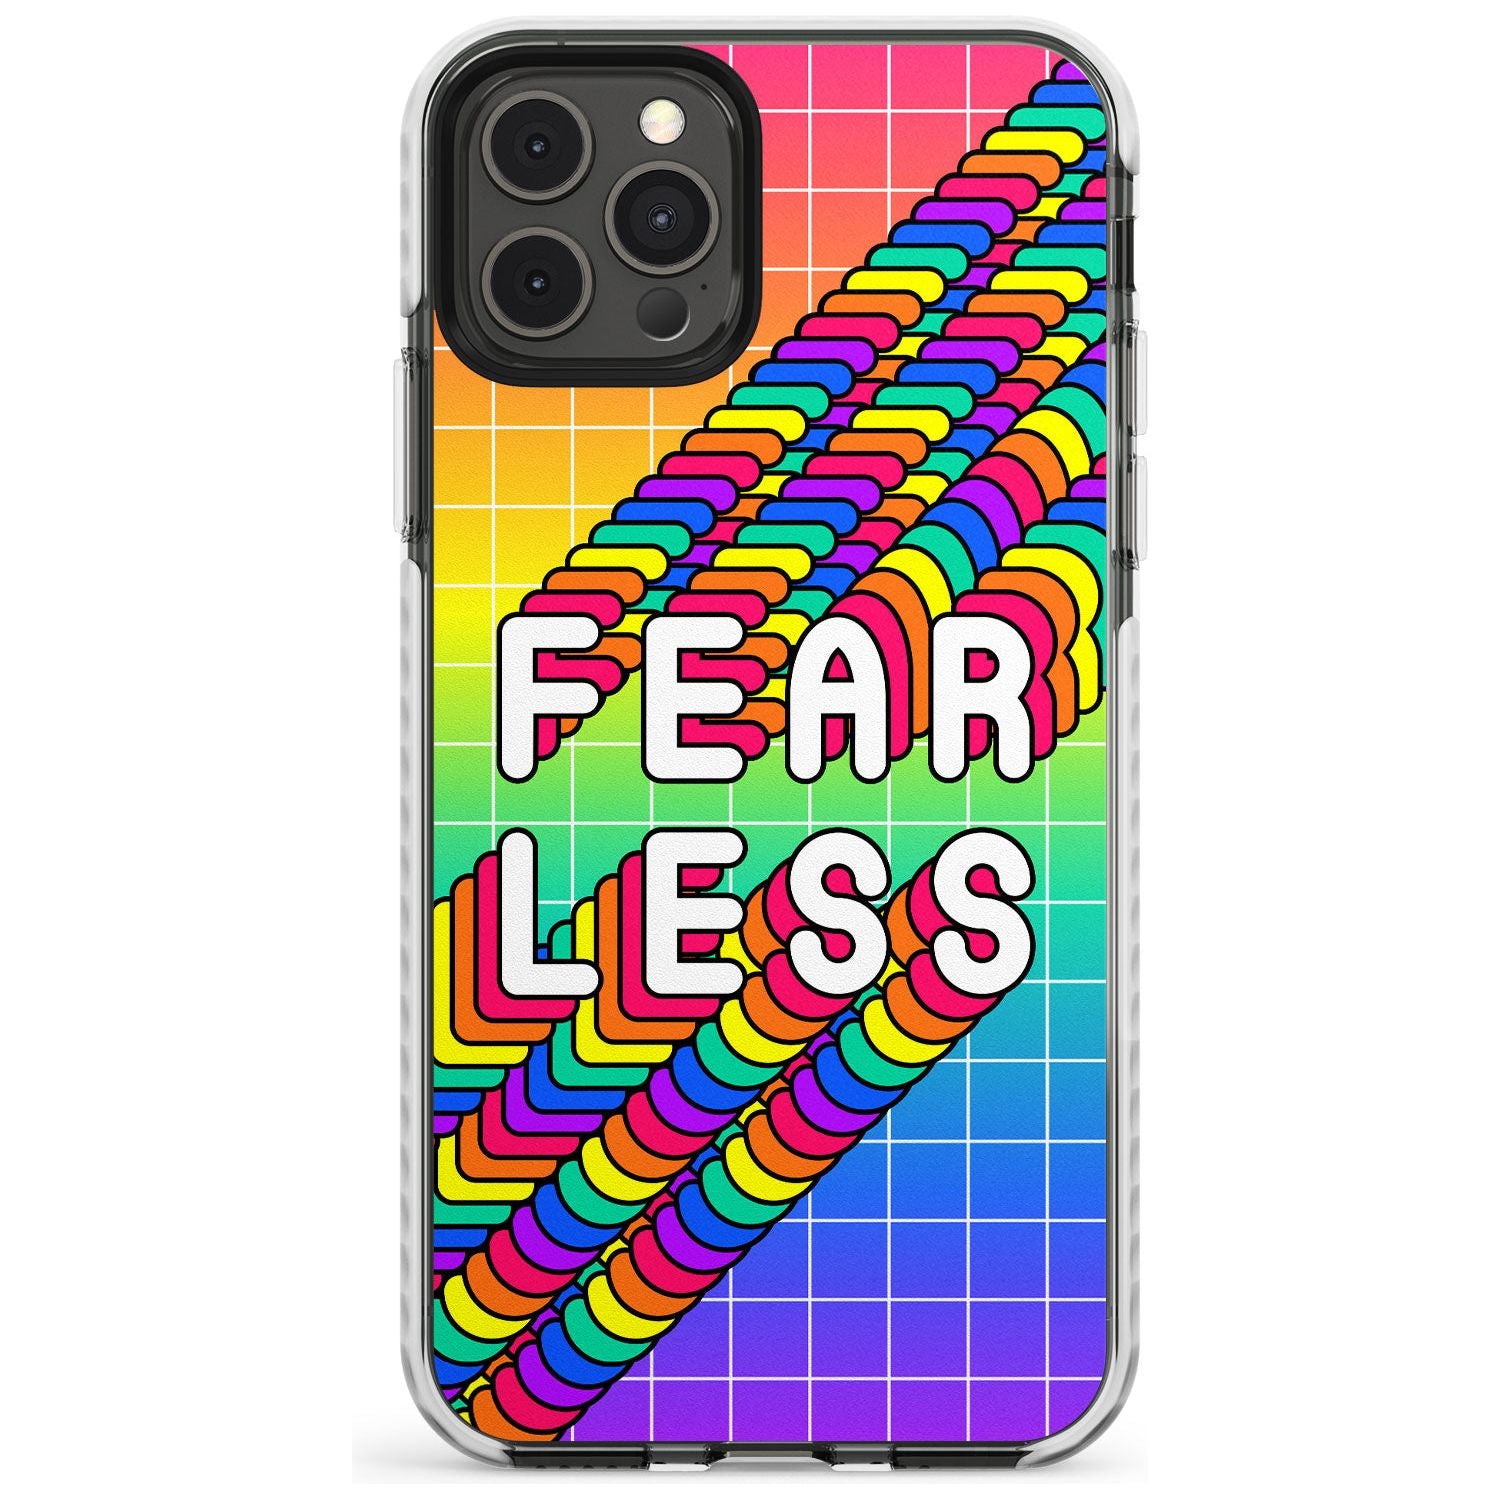 Fearless Impact Phone Case for iPhone 11 Pro Max